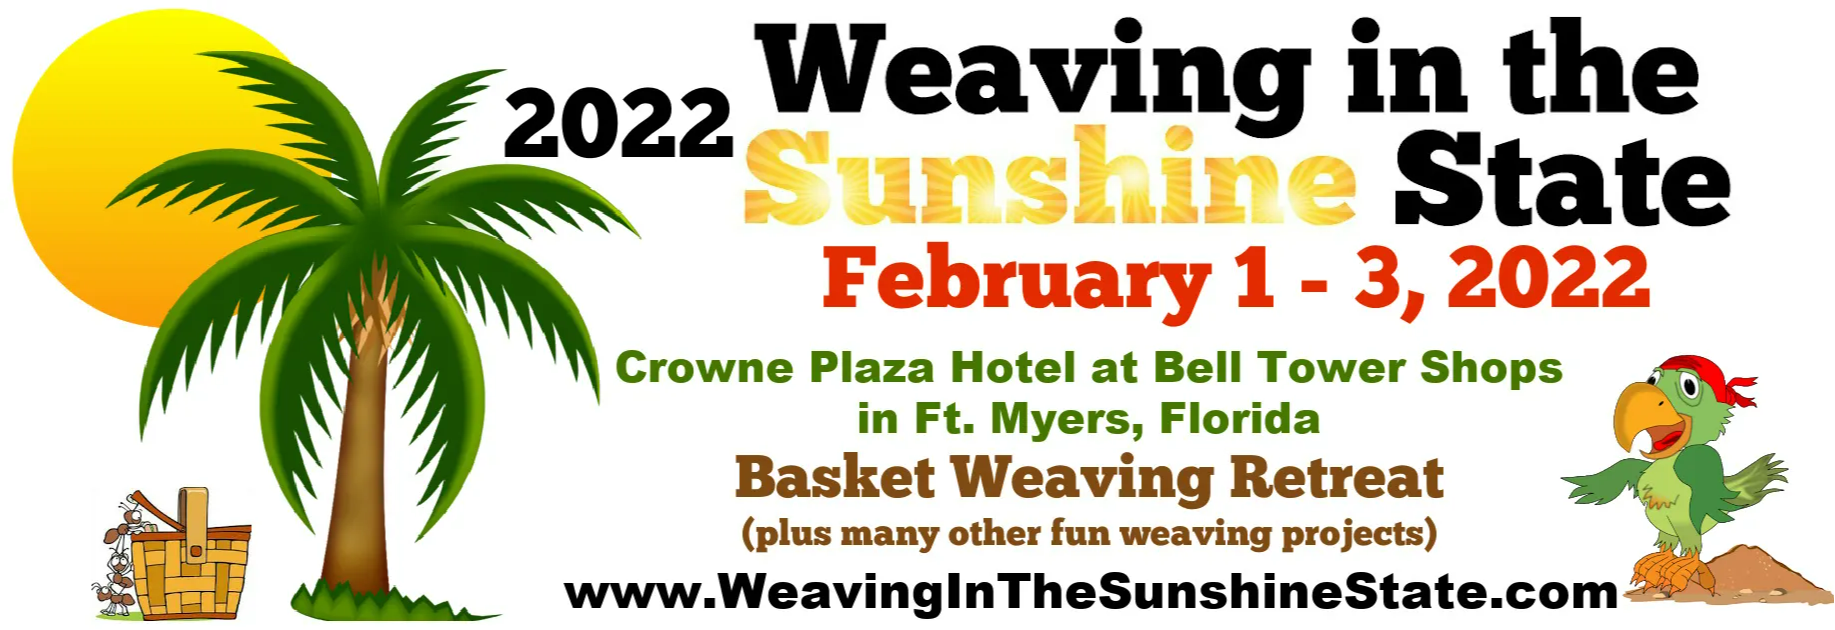 2022 Weaving in the Sunshine State